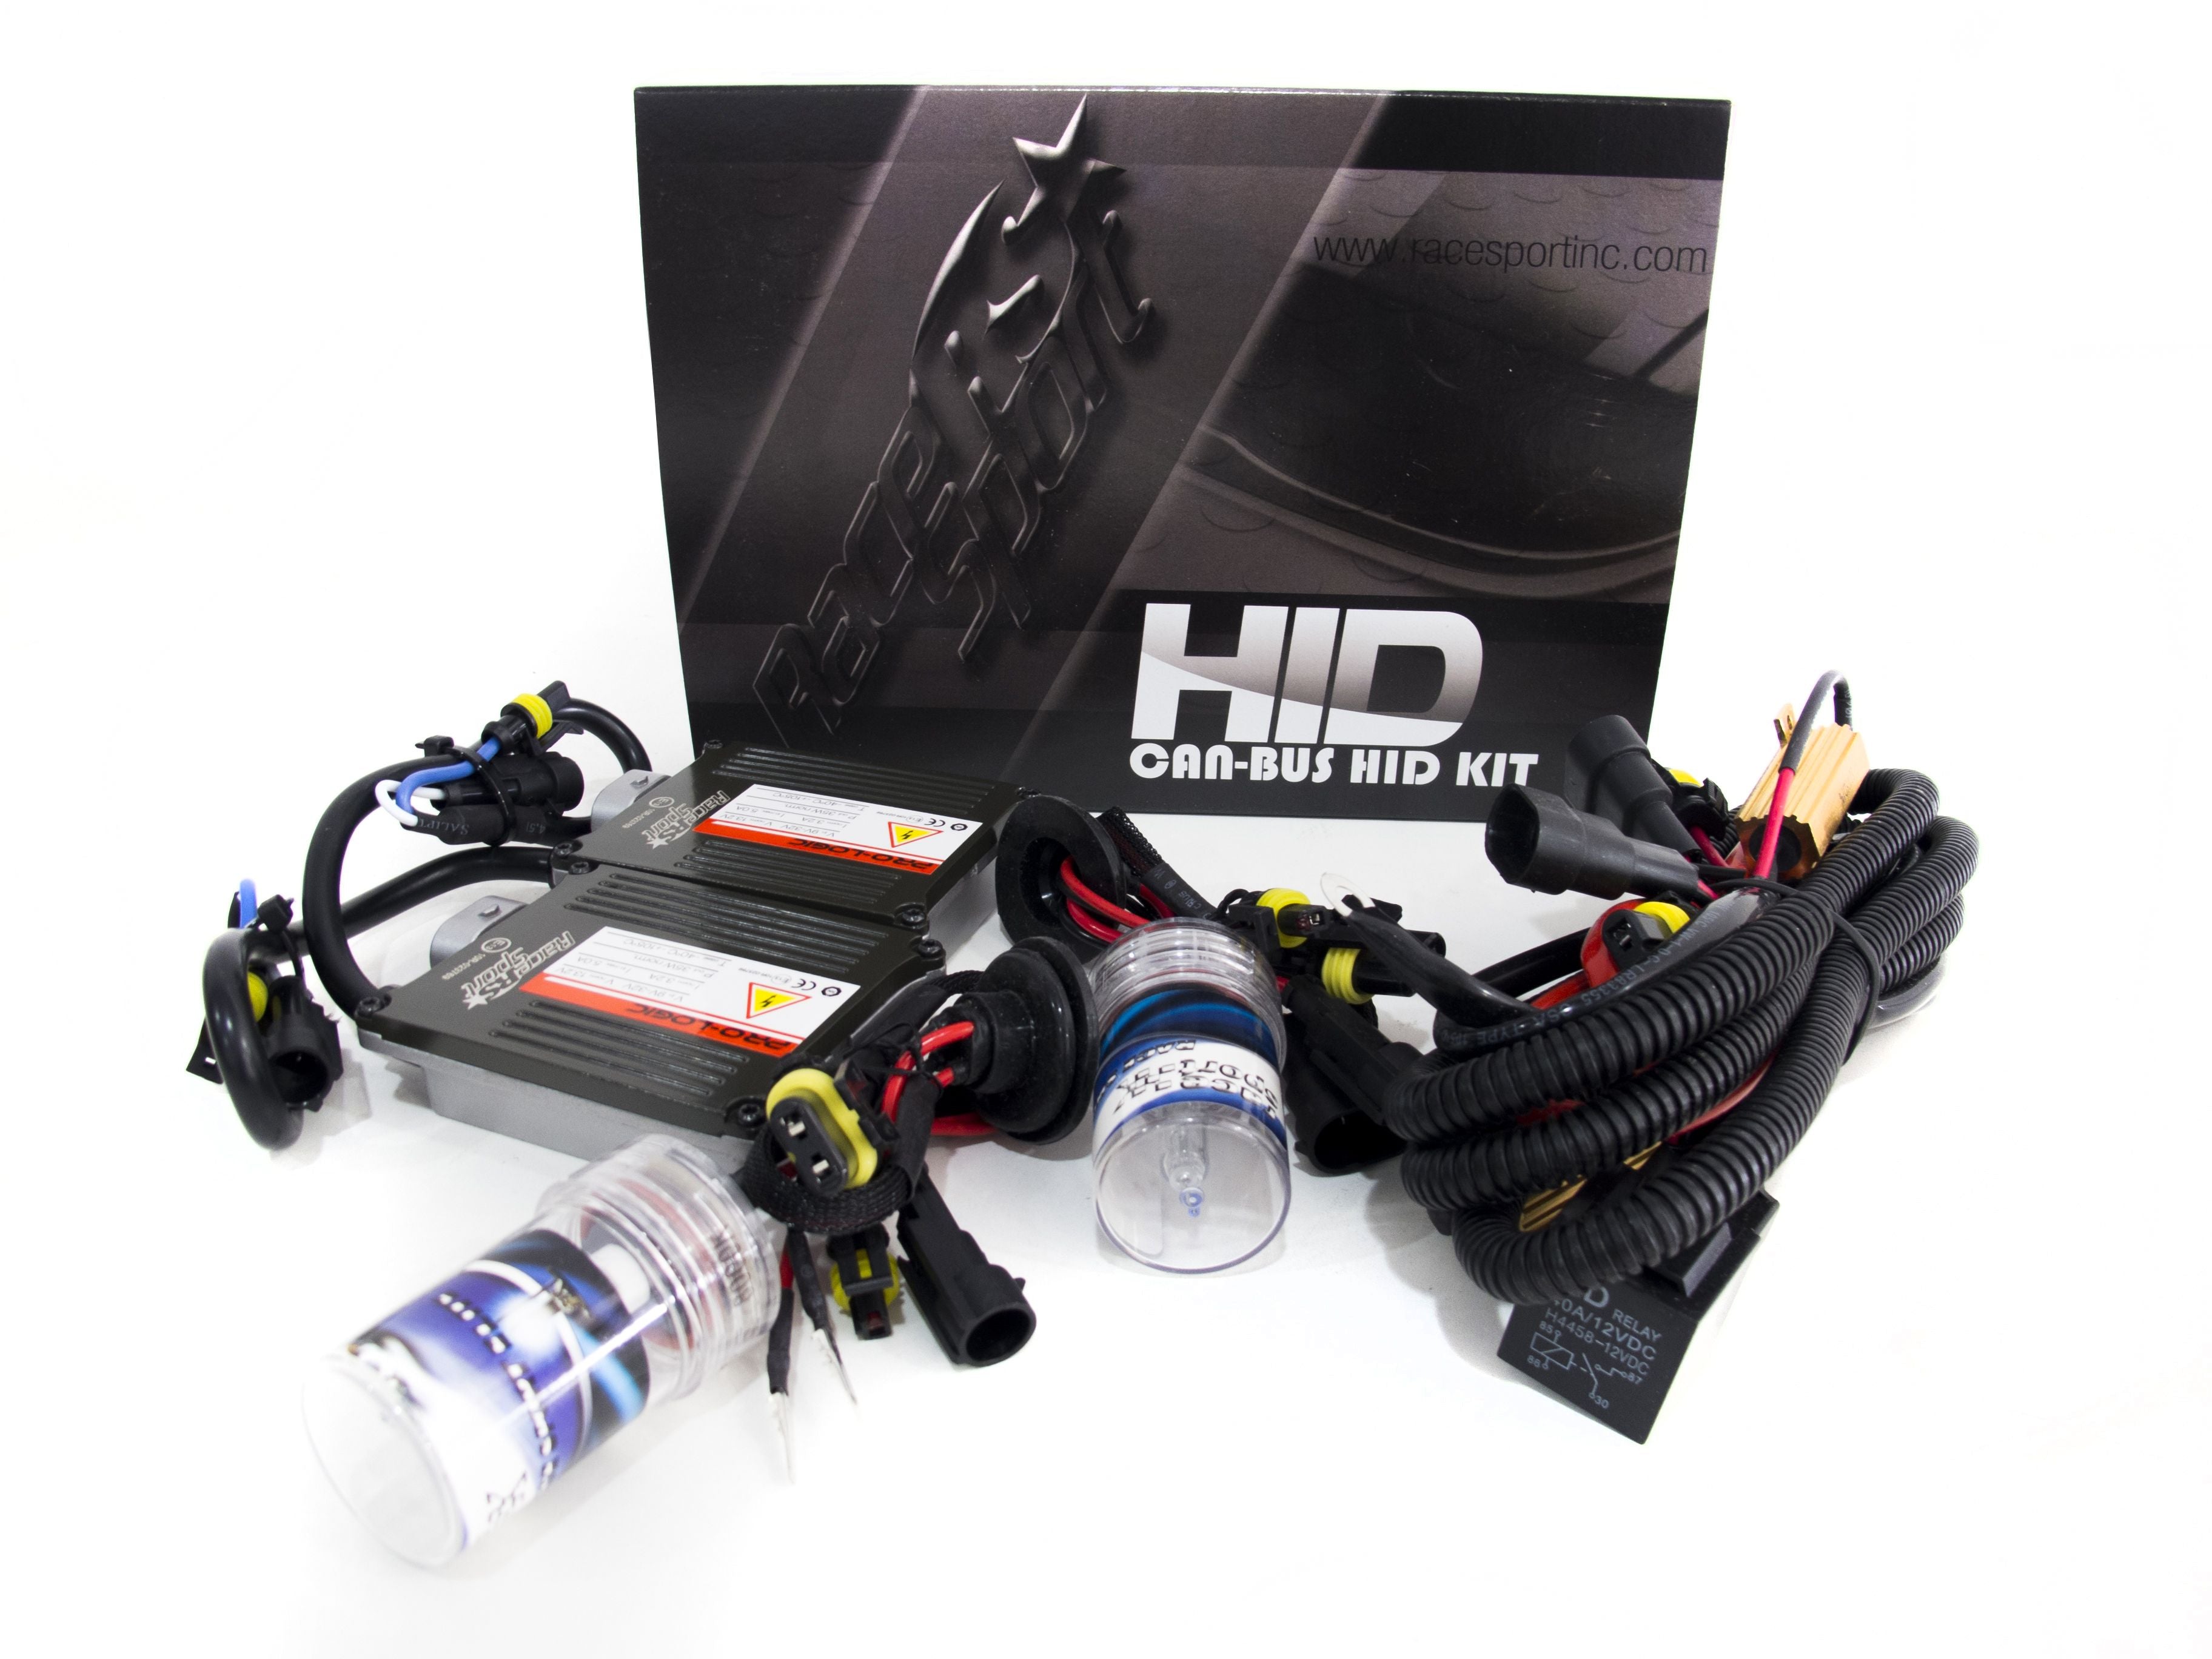 Race Sport H6 Gen 1 Canbus Hid Mid-Slim Ballast Kit with Relay Resistor Harness H6-10K-G1-CANBUS-R